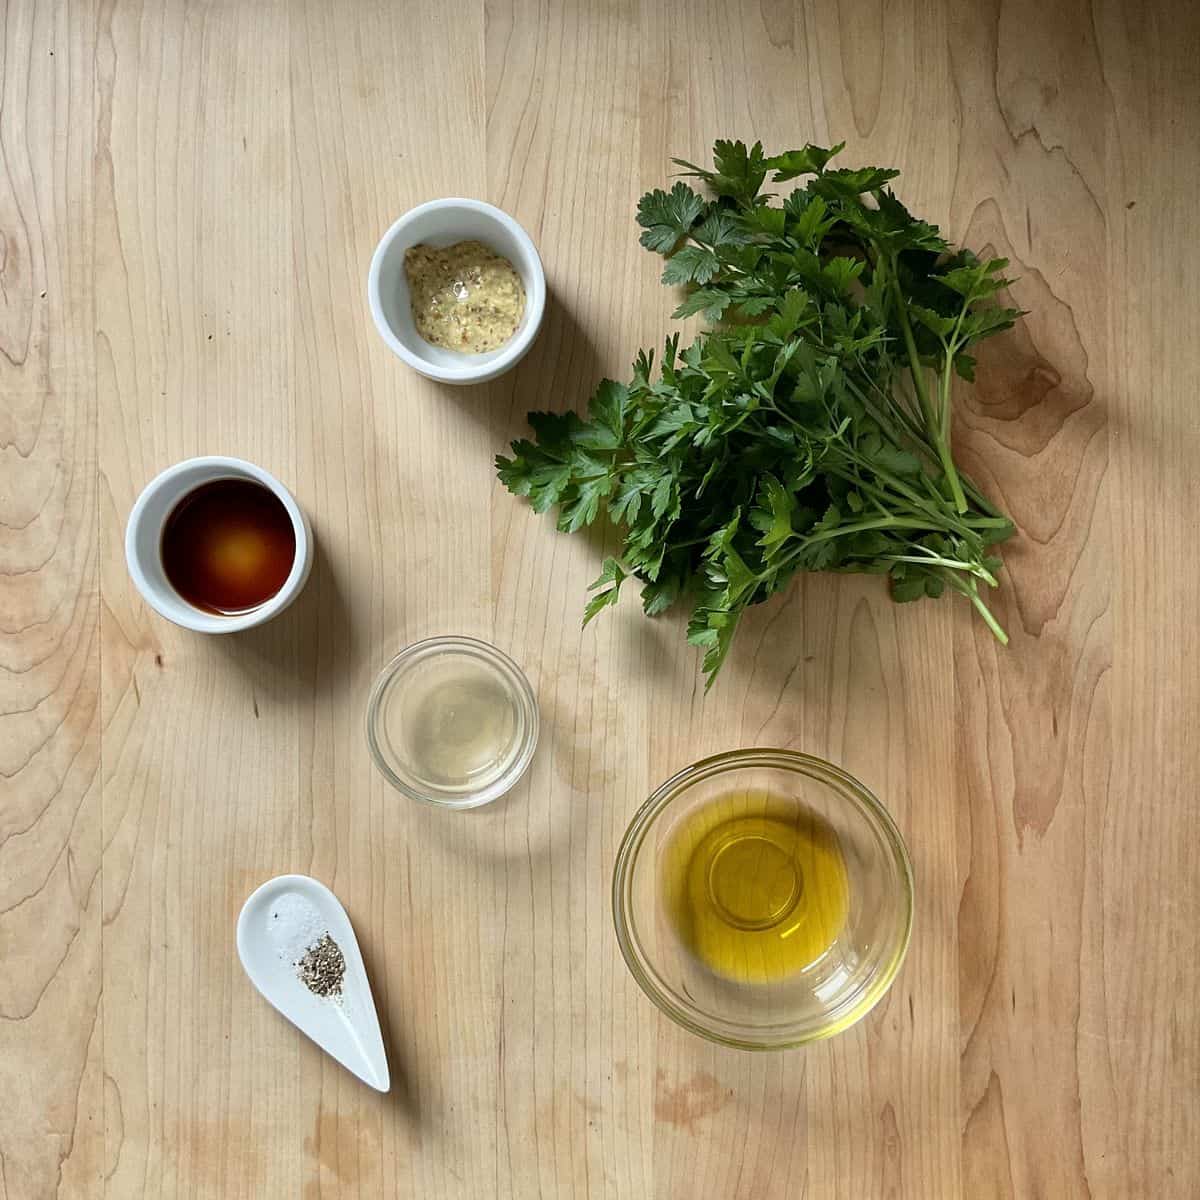 Ingredients to make a balsamic vinaigrette on a wooden surface.